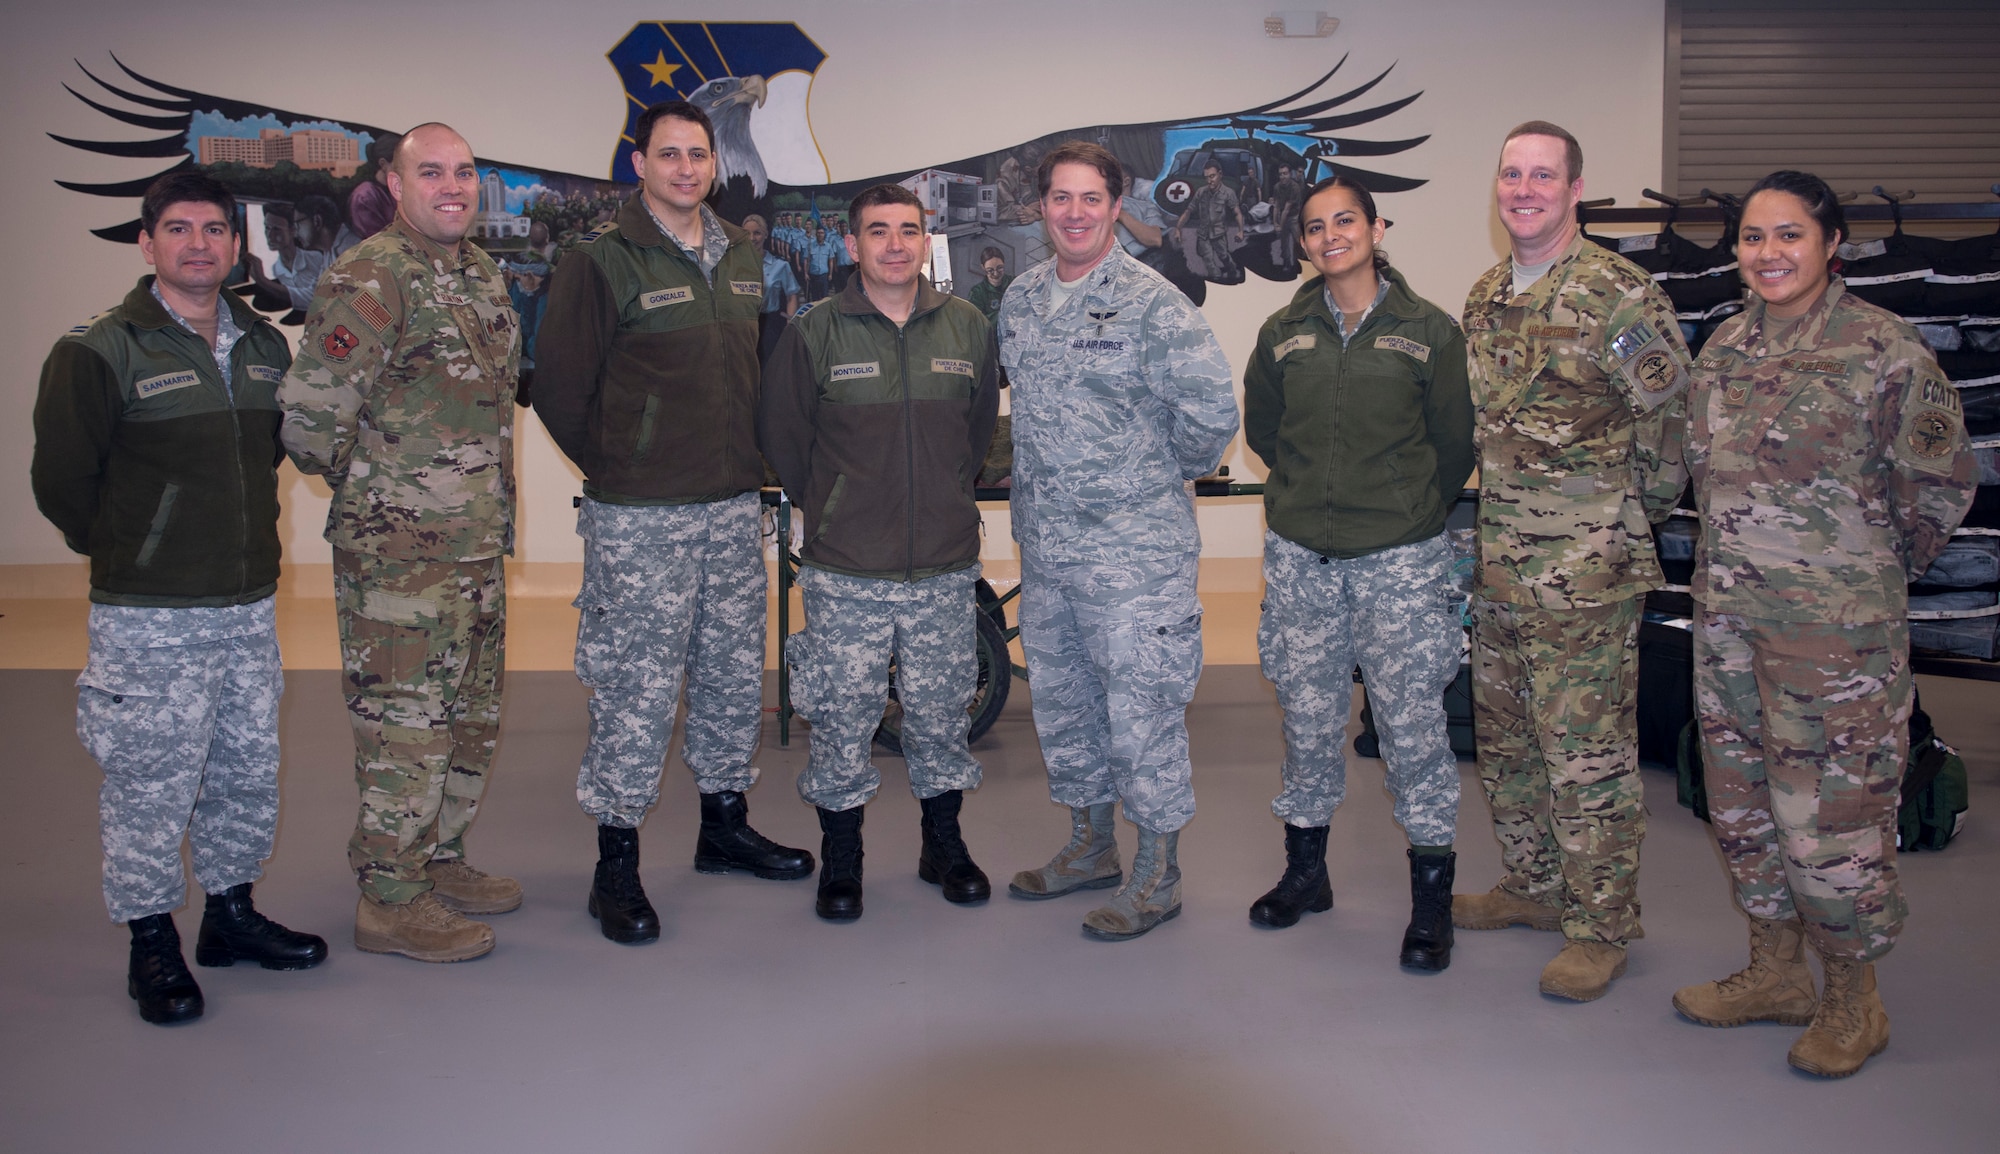 Medical health officers from the Chilean Air Force pose for a photo with members from the 59th Medical Wing’s Critical Care Air Transport Team on Dec.7, at Camp Bramble on Joint Base San Antonio-Lackland, Texas. The Chileans toured Wilford Hall’s Simulation Center, which provides a hands-on learning environment through the use of high-fidelity mannequins and virtual reality simulators, before visiting Camp Bramble, the CCATT training and mission staging location. (U.S. Air Force photo by Kiley Dougherty)